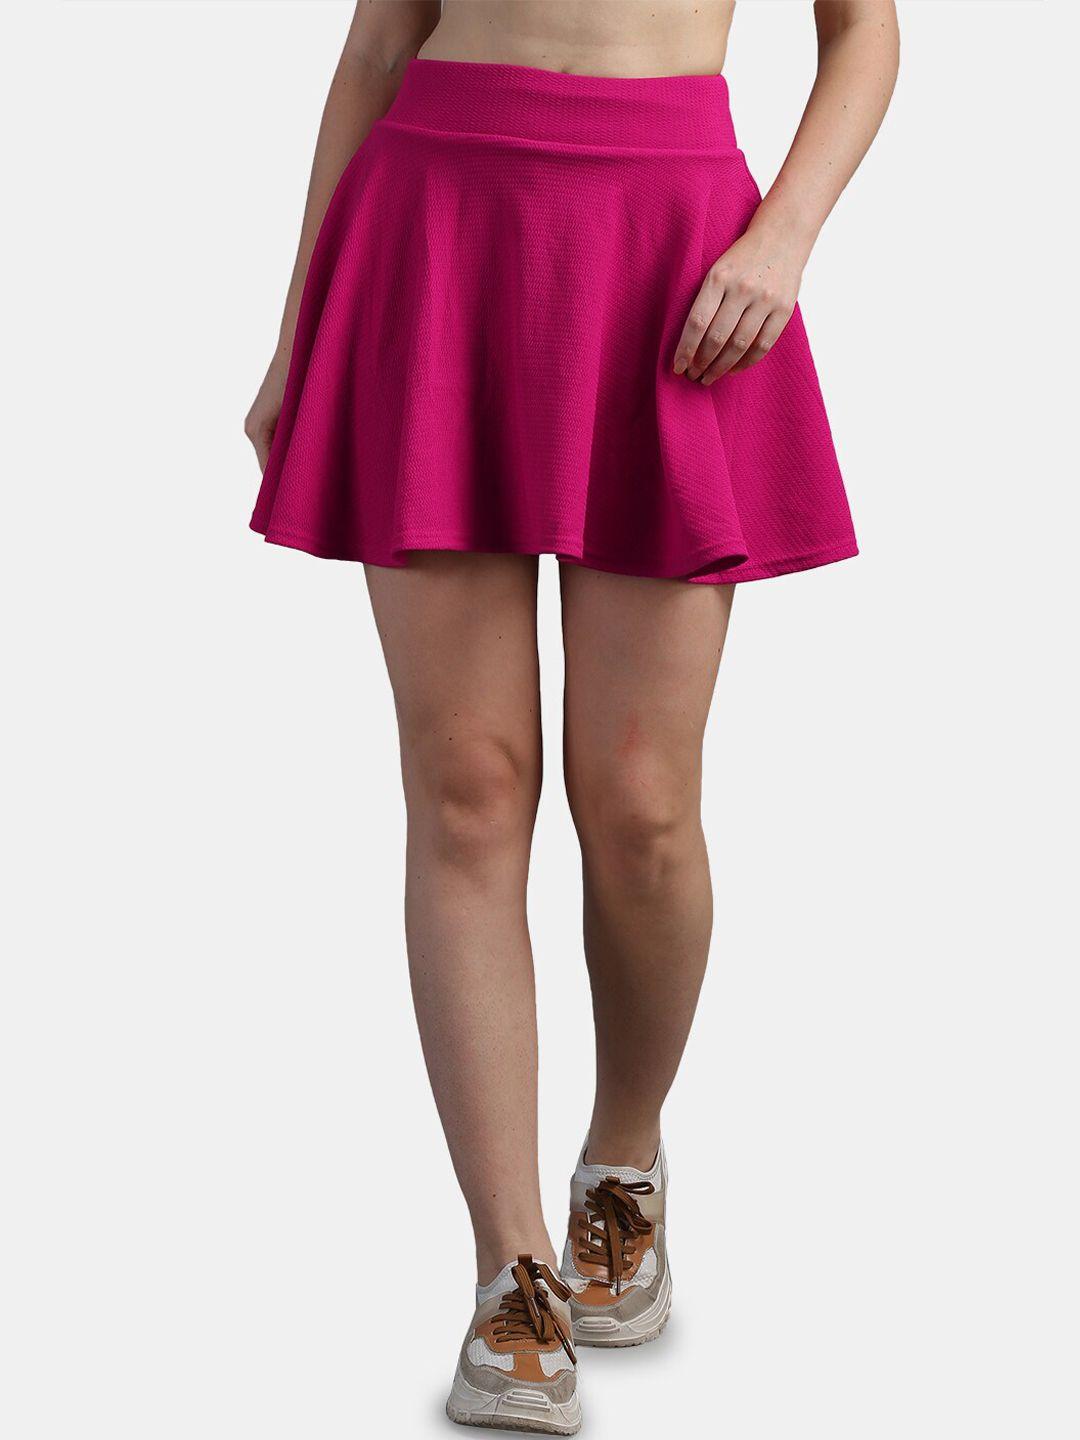 n-gal-flared-mini-skater-skirt-with-attached-shorts